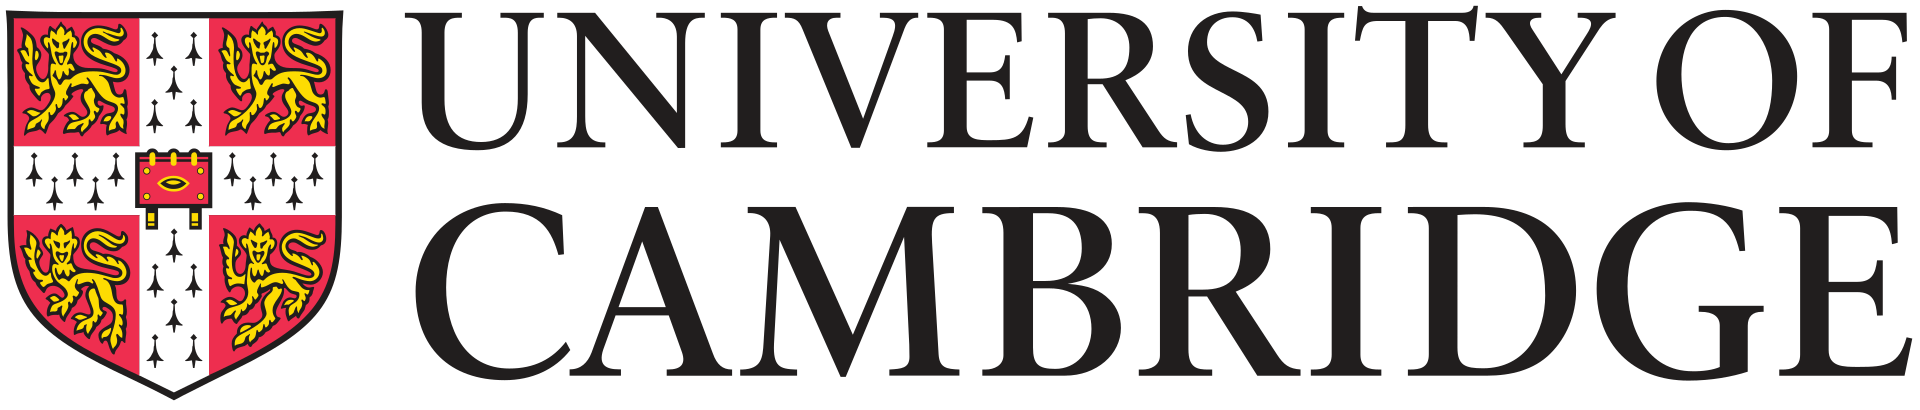 University of Cambridge logo, By Source, Fair use, https://en.wikipedia.org/w/index.php?curid=31724517"